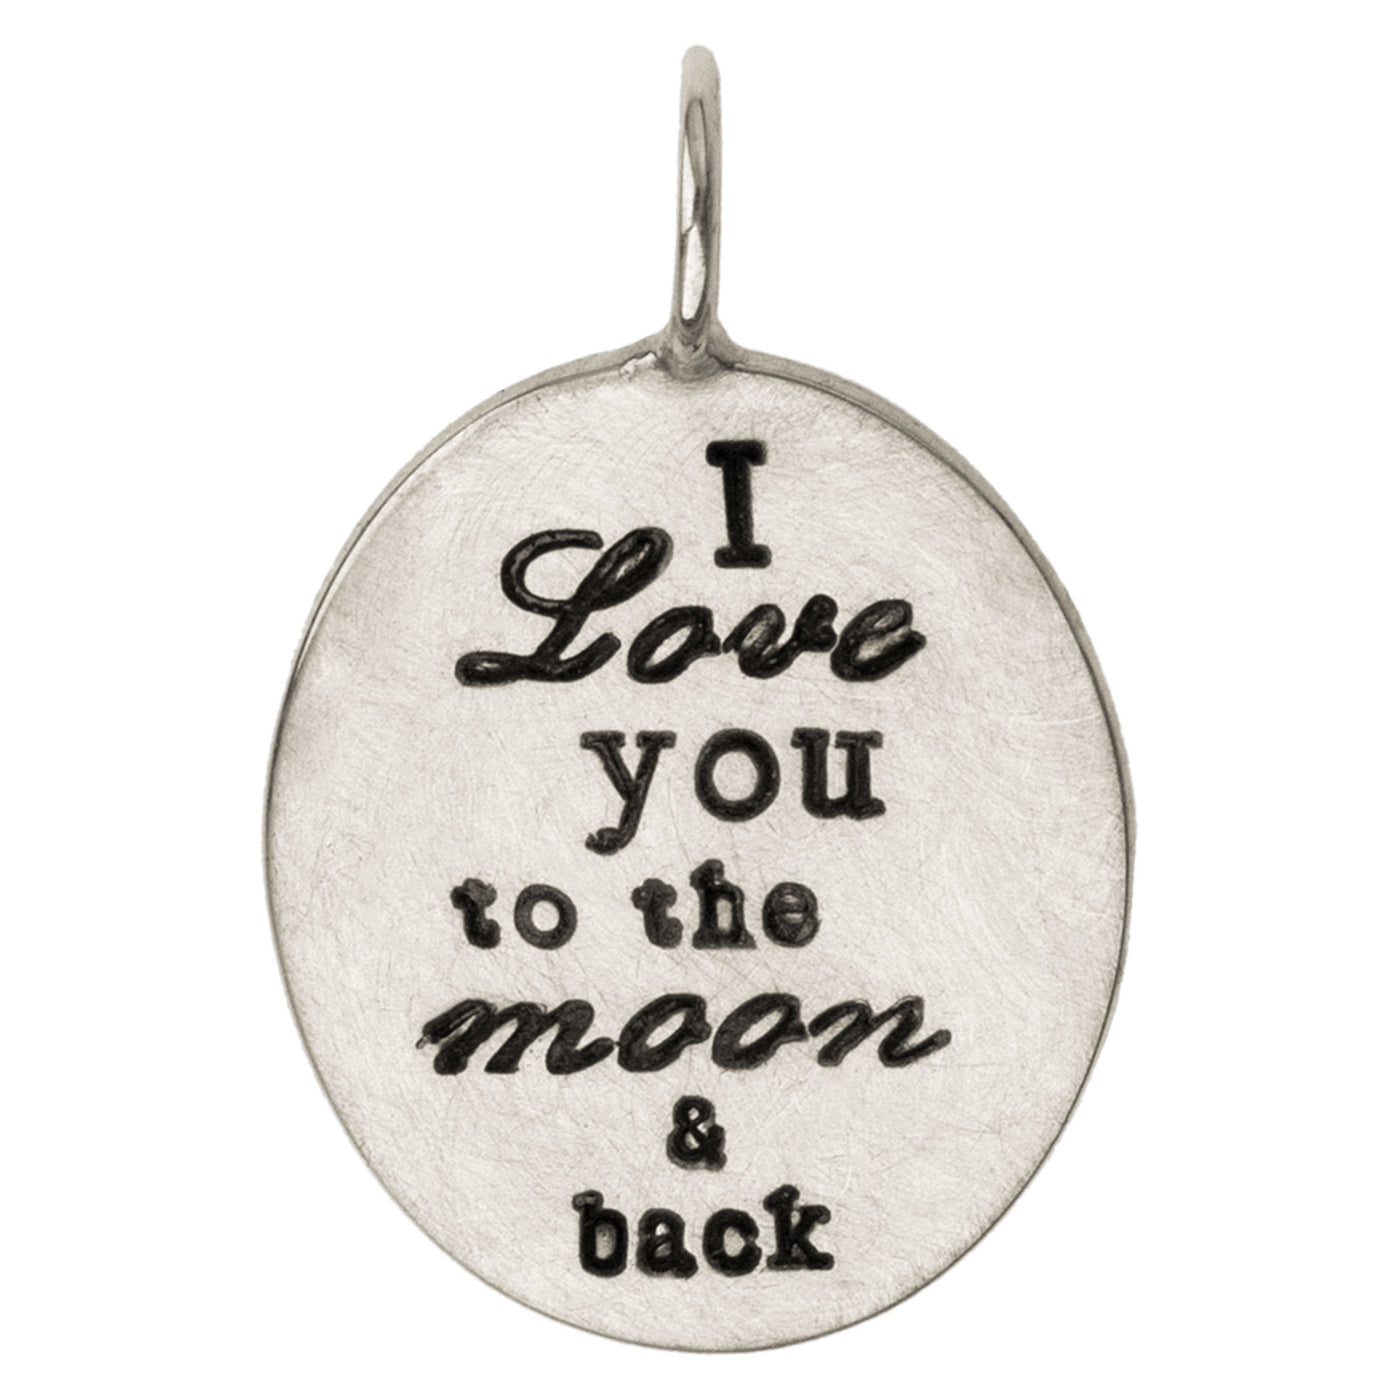 To the Moon & Back Oval Charm